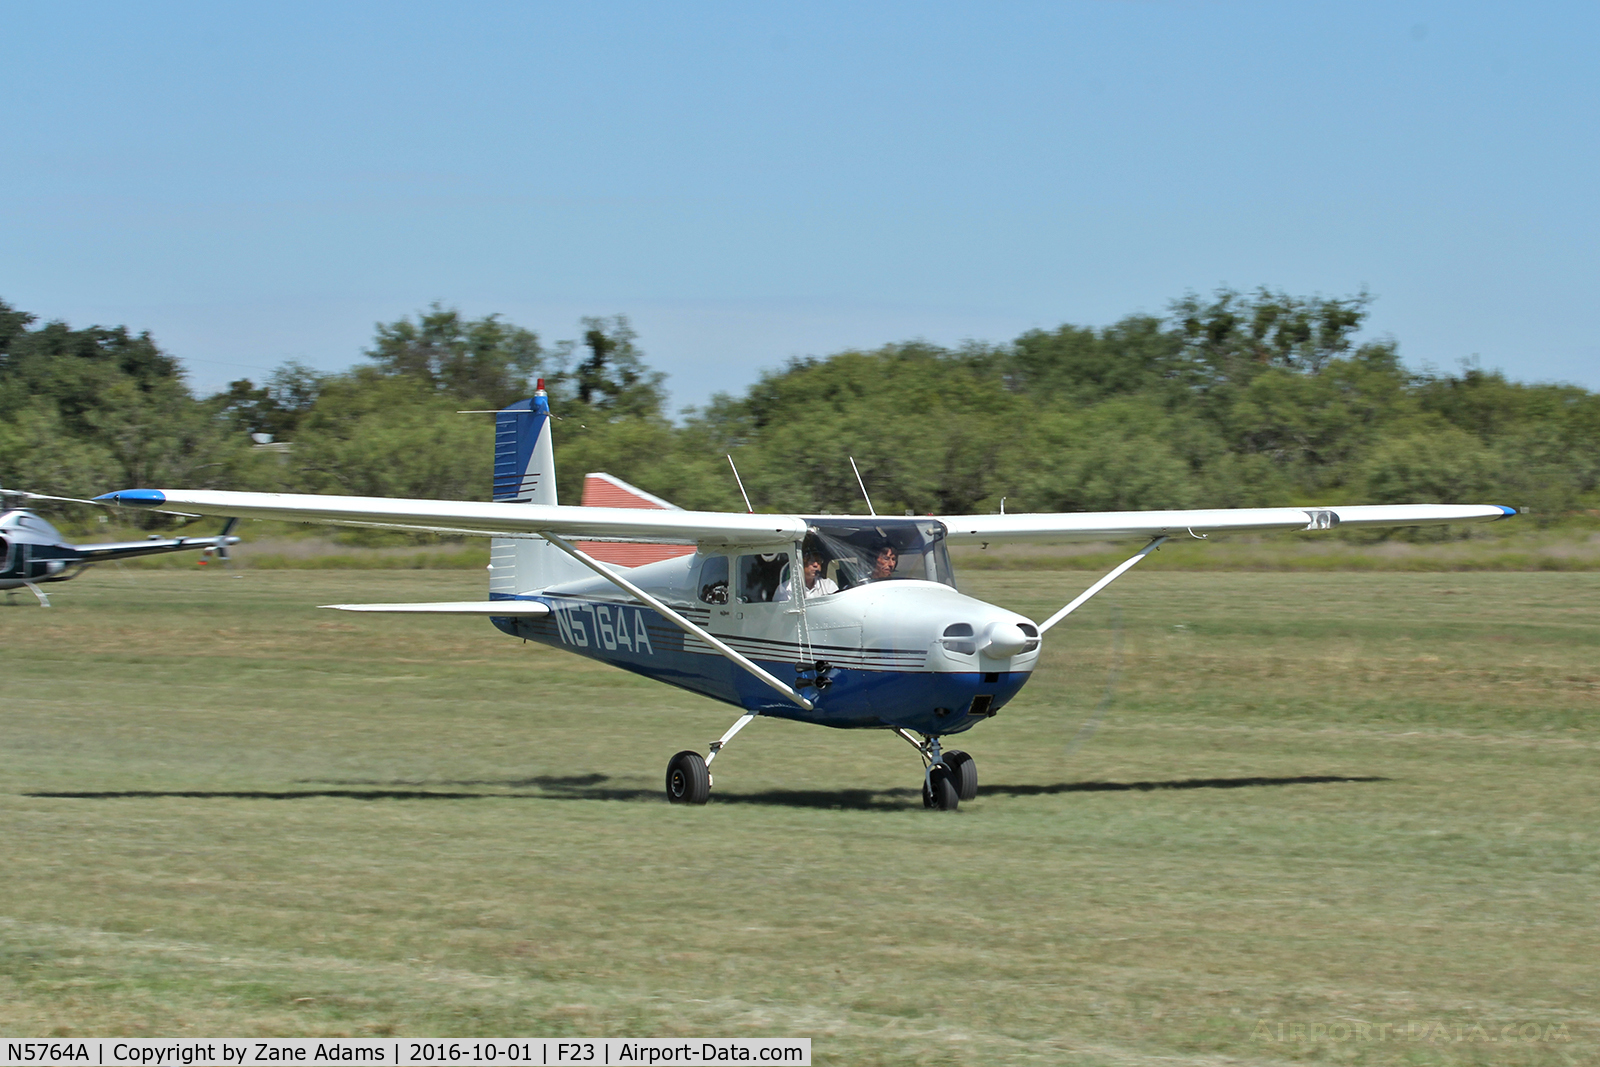 N5764A, 1956 Cessna 172 C/N 28364, At the 2016 Ranger, Texas Fly-in